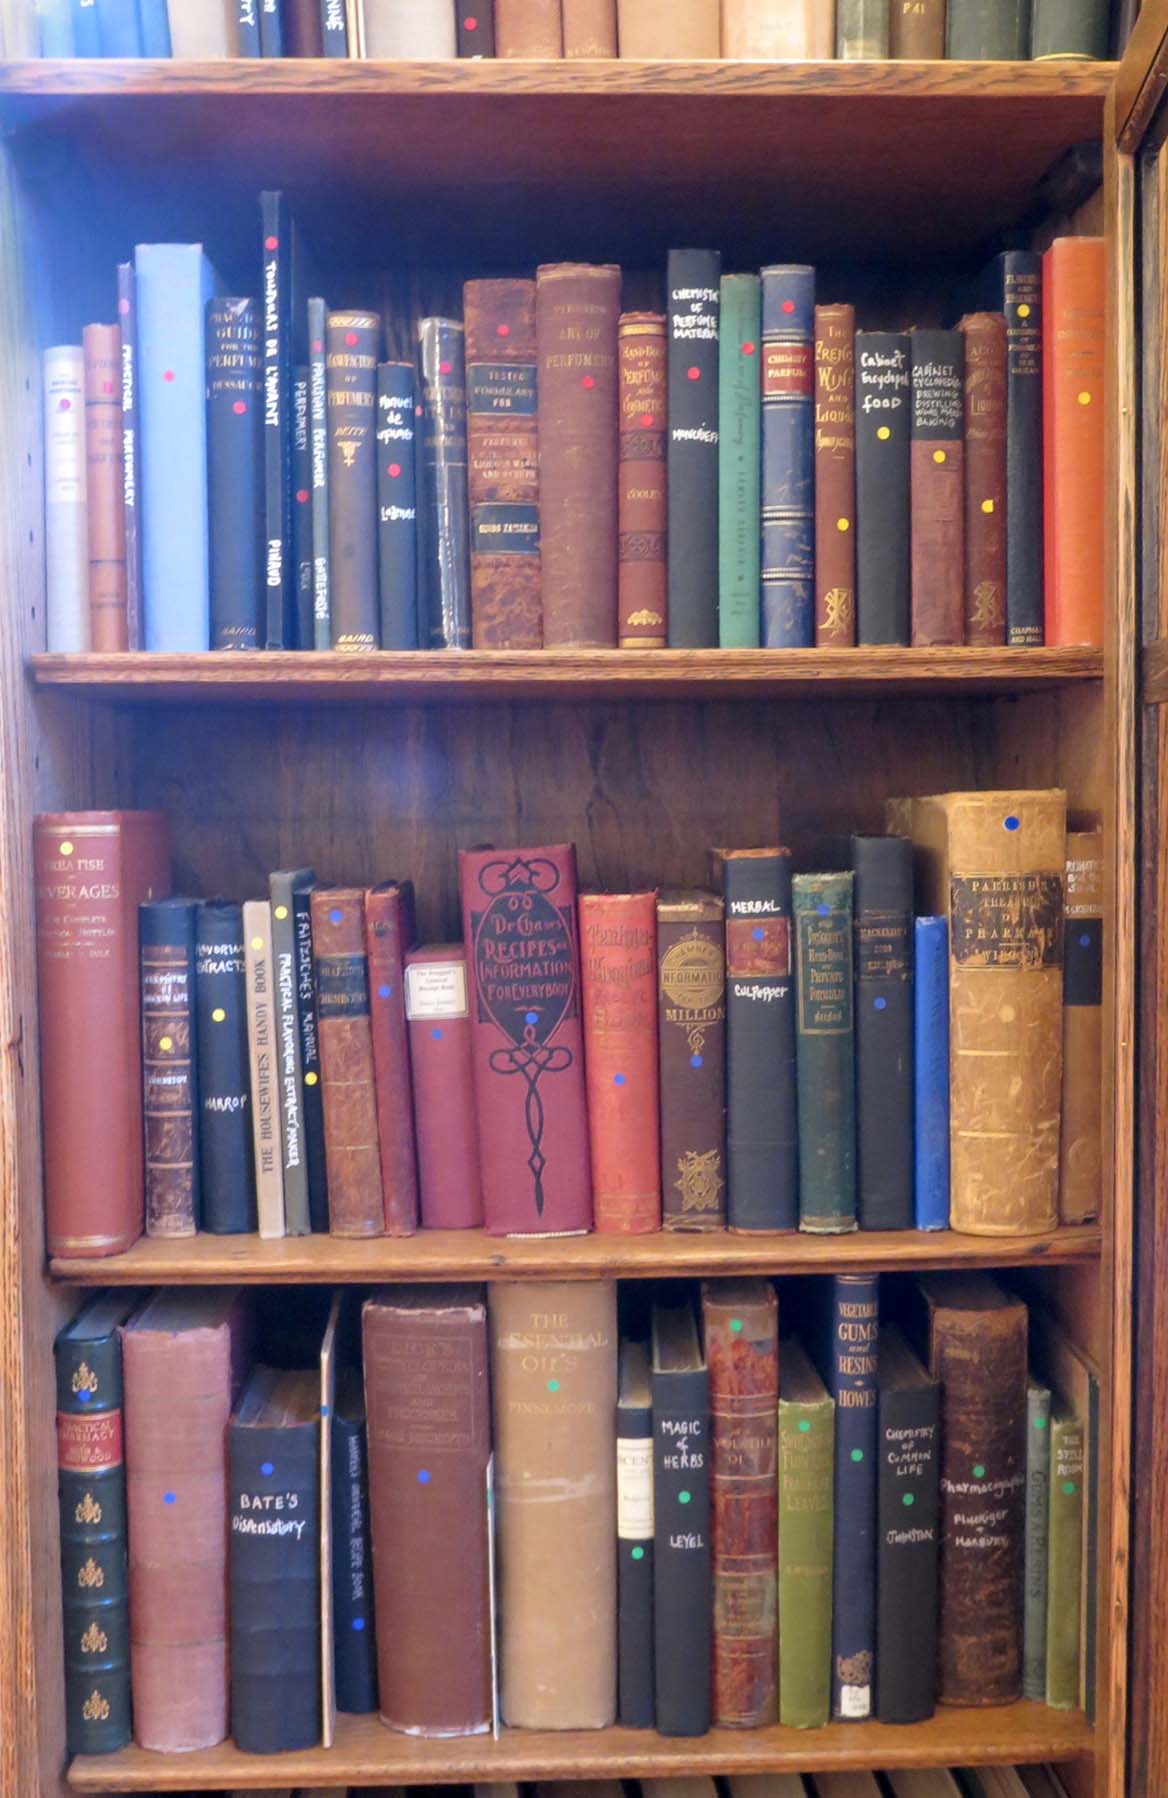 Archive bookcase from Mandy Aftel's Museum